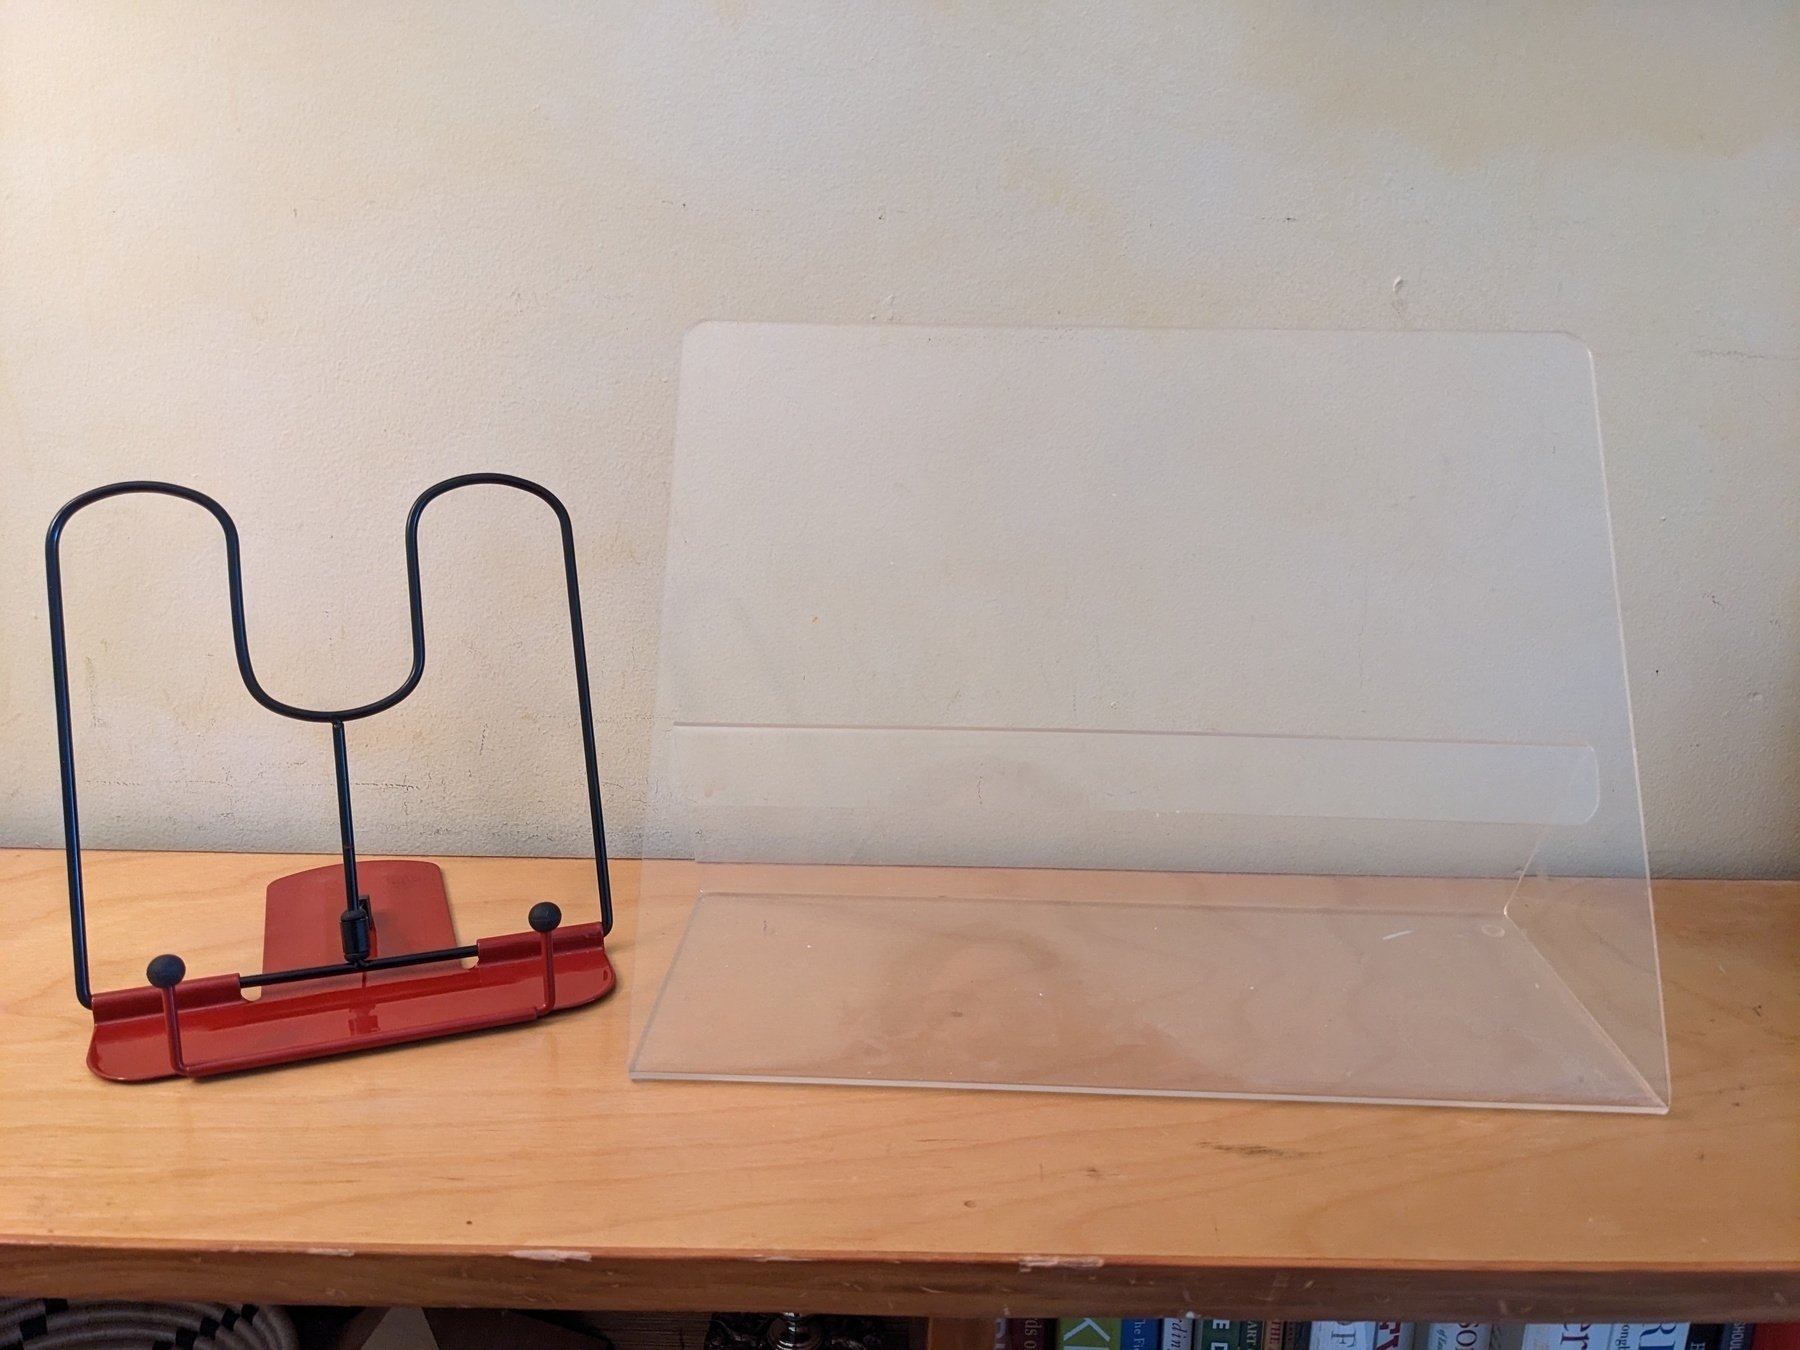 folding book holder for typing, on a shelf next to large acrylic cookbook holder